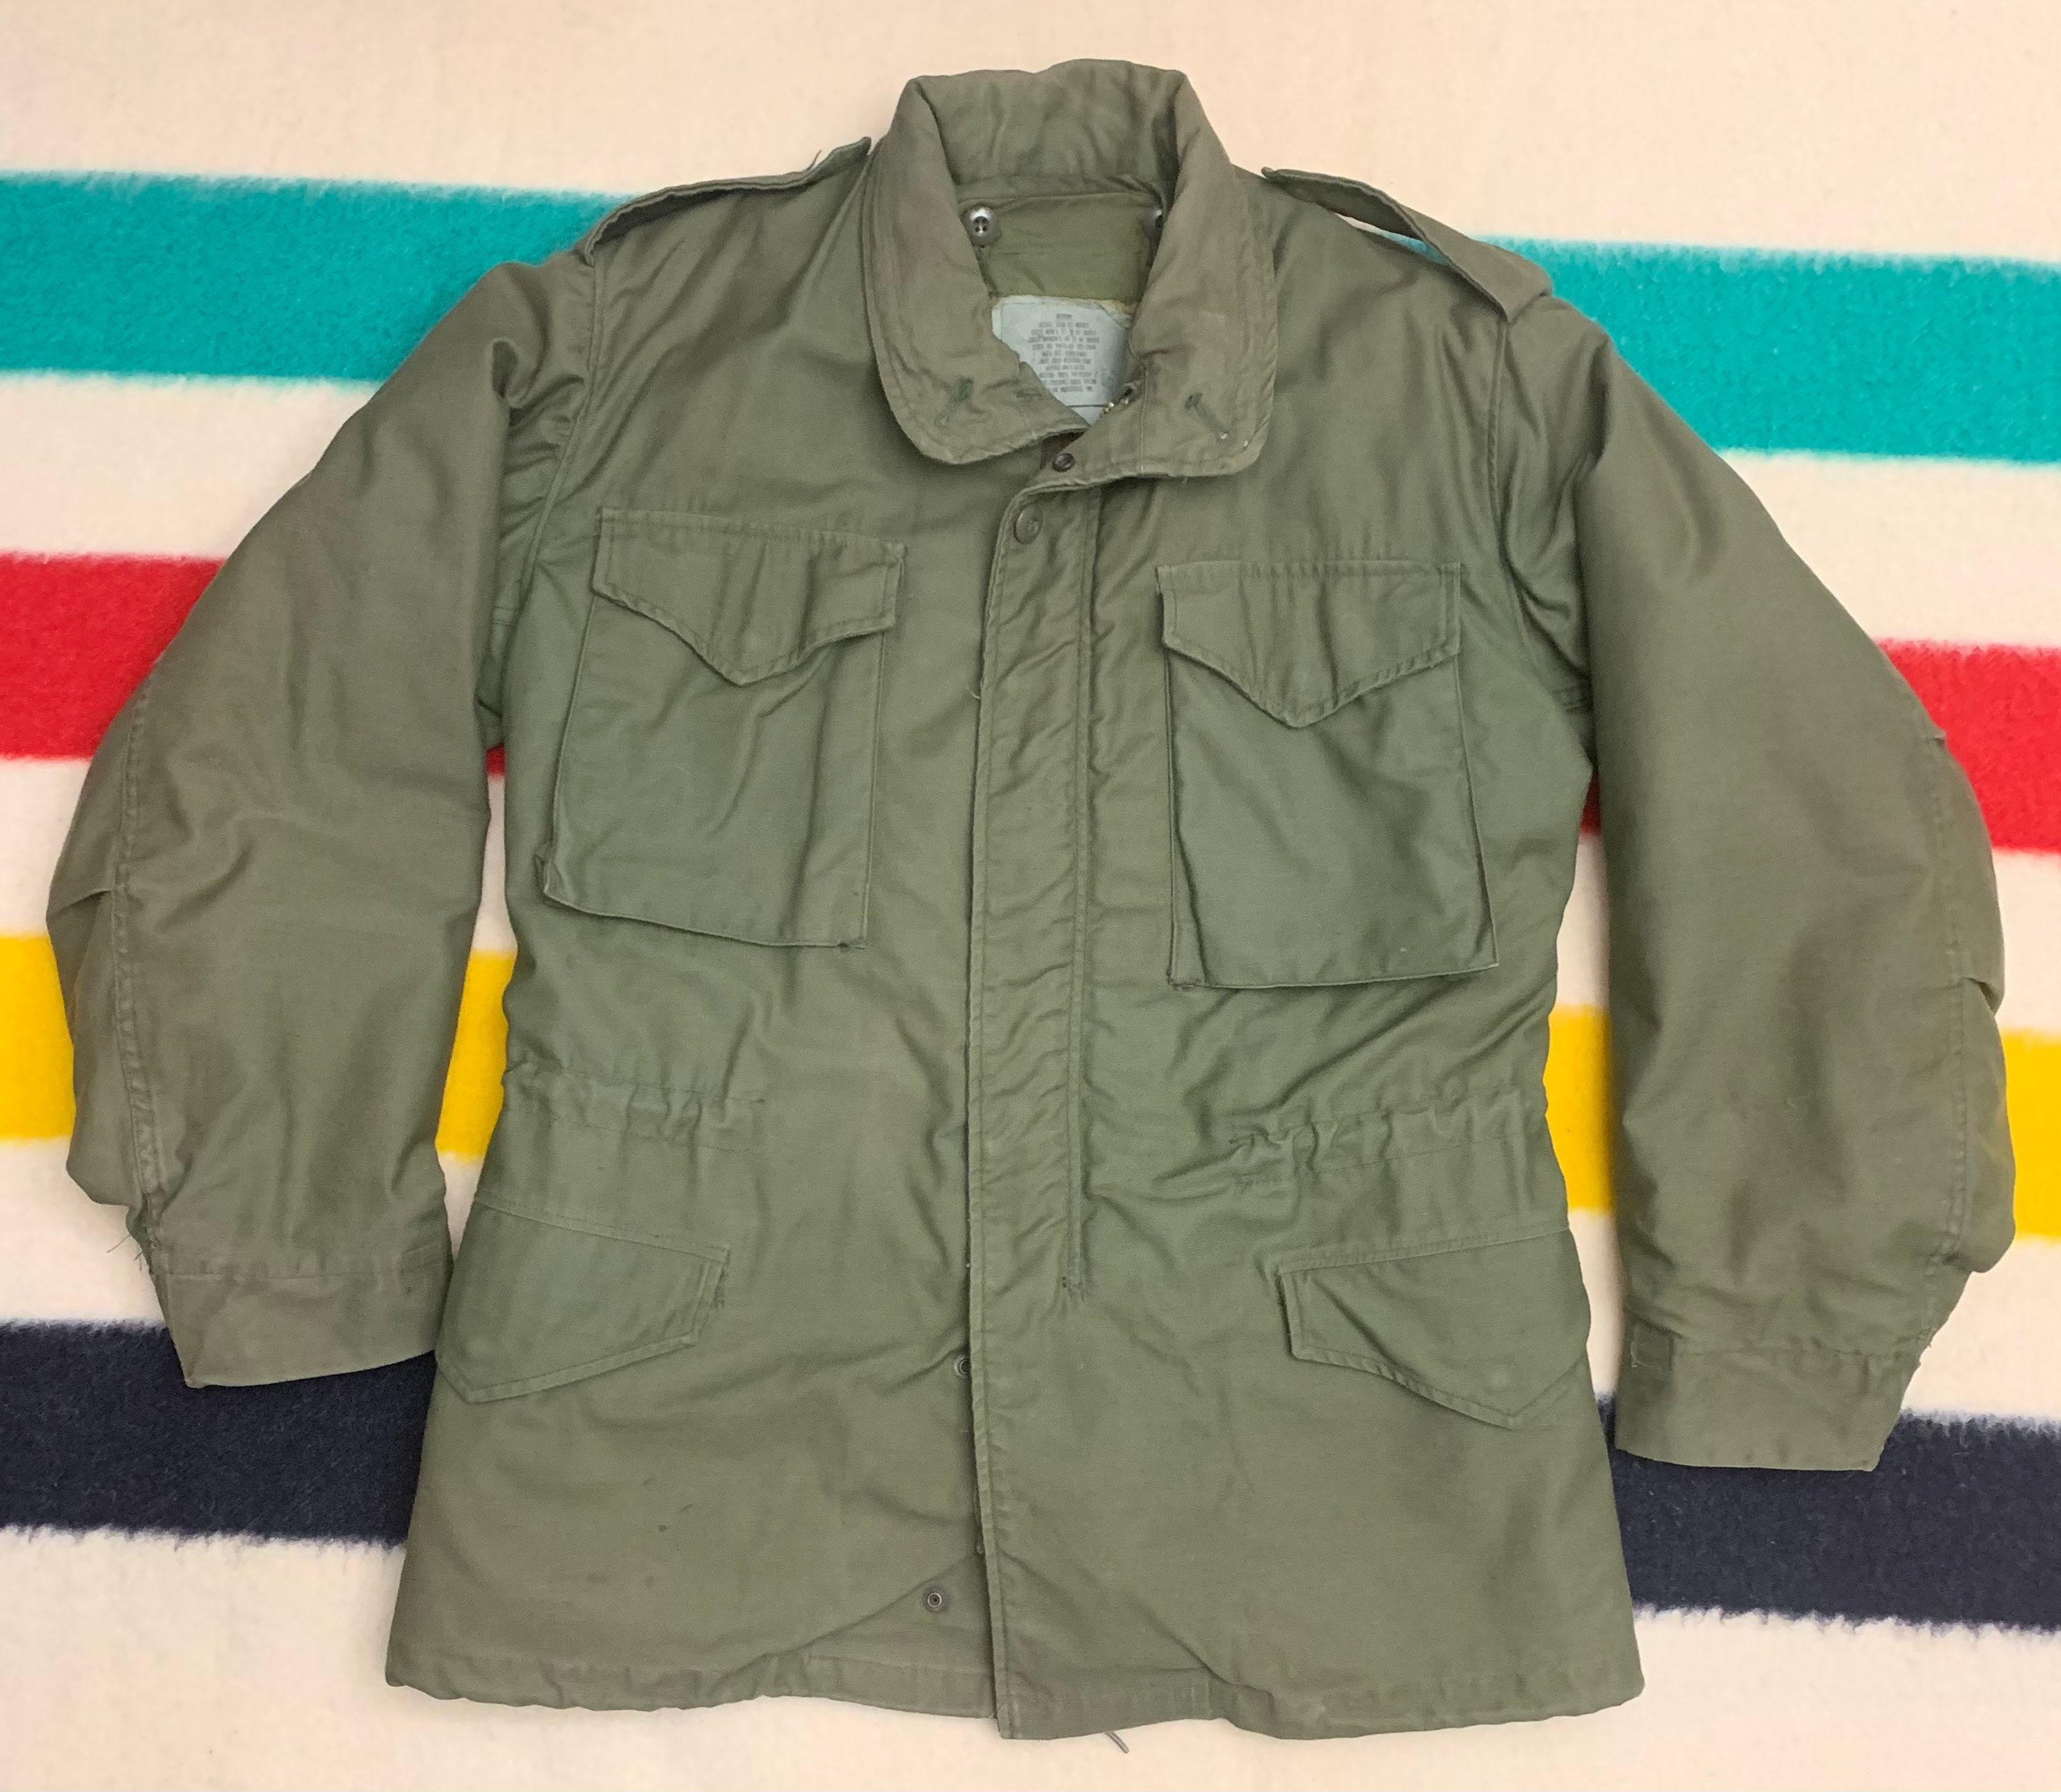 Vintage Army Field Jacket OG-107 With Quilted Liner Jacket - Etsy Hong Kong